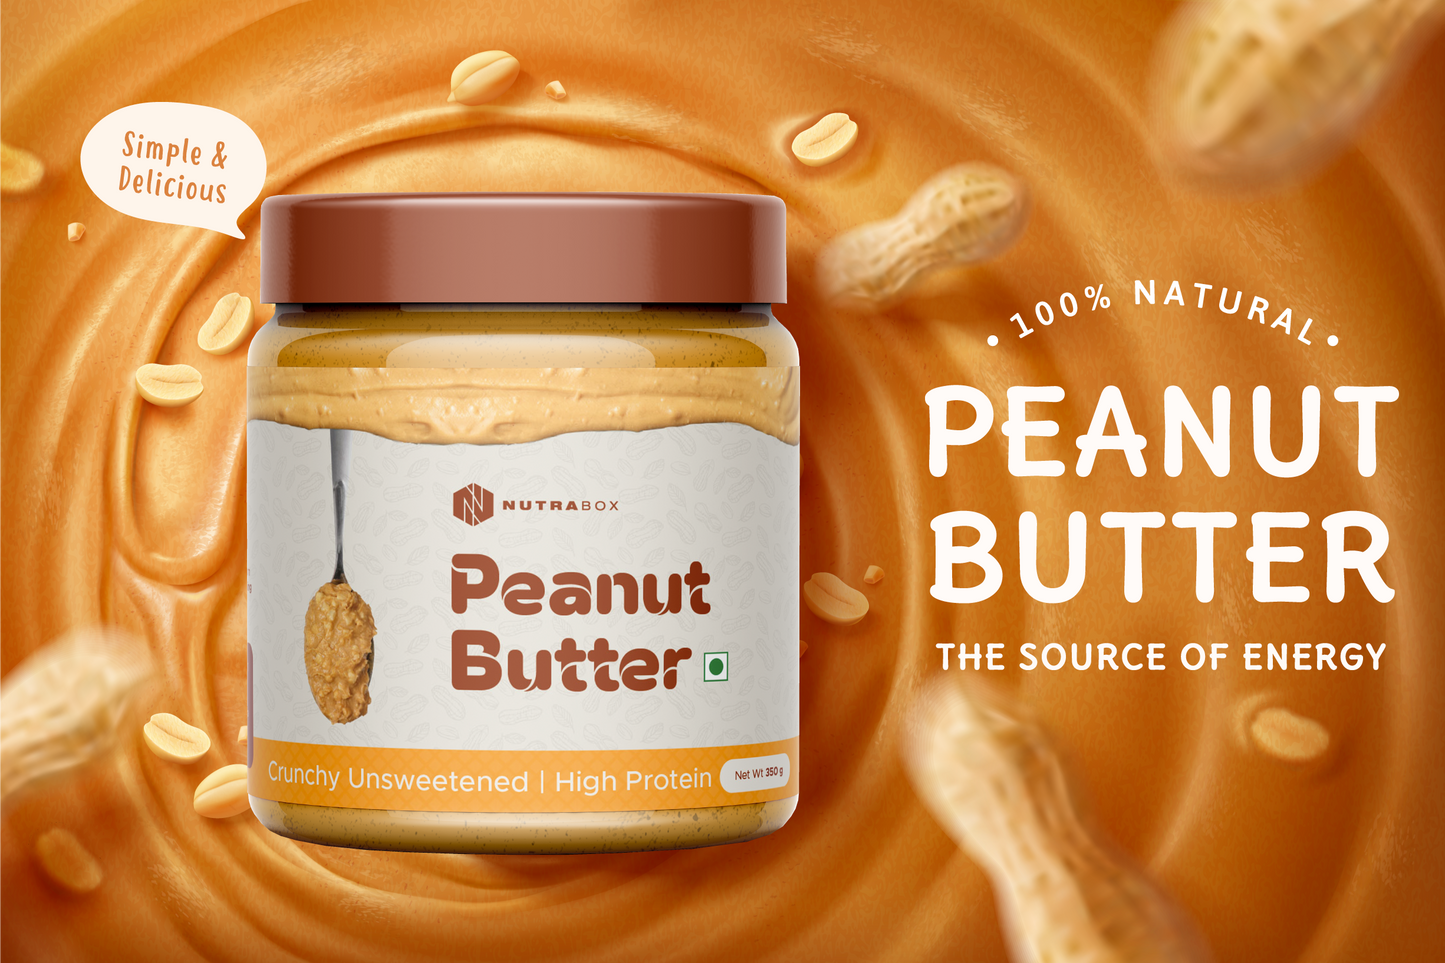 Peanut Butter - Crunchy Unsweetened - Buy 1 Get 1 Free - Nutrabox India